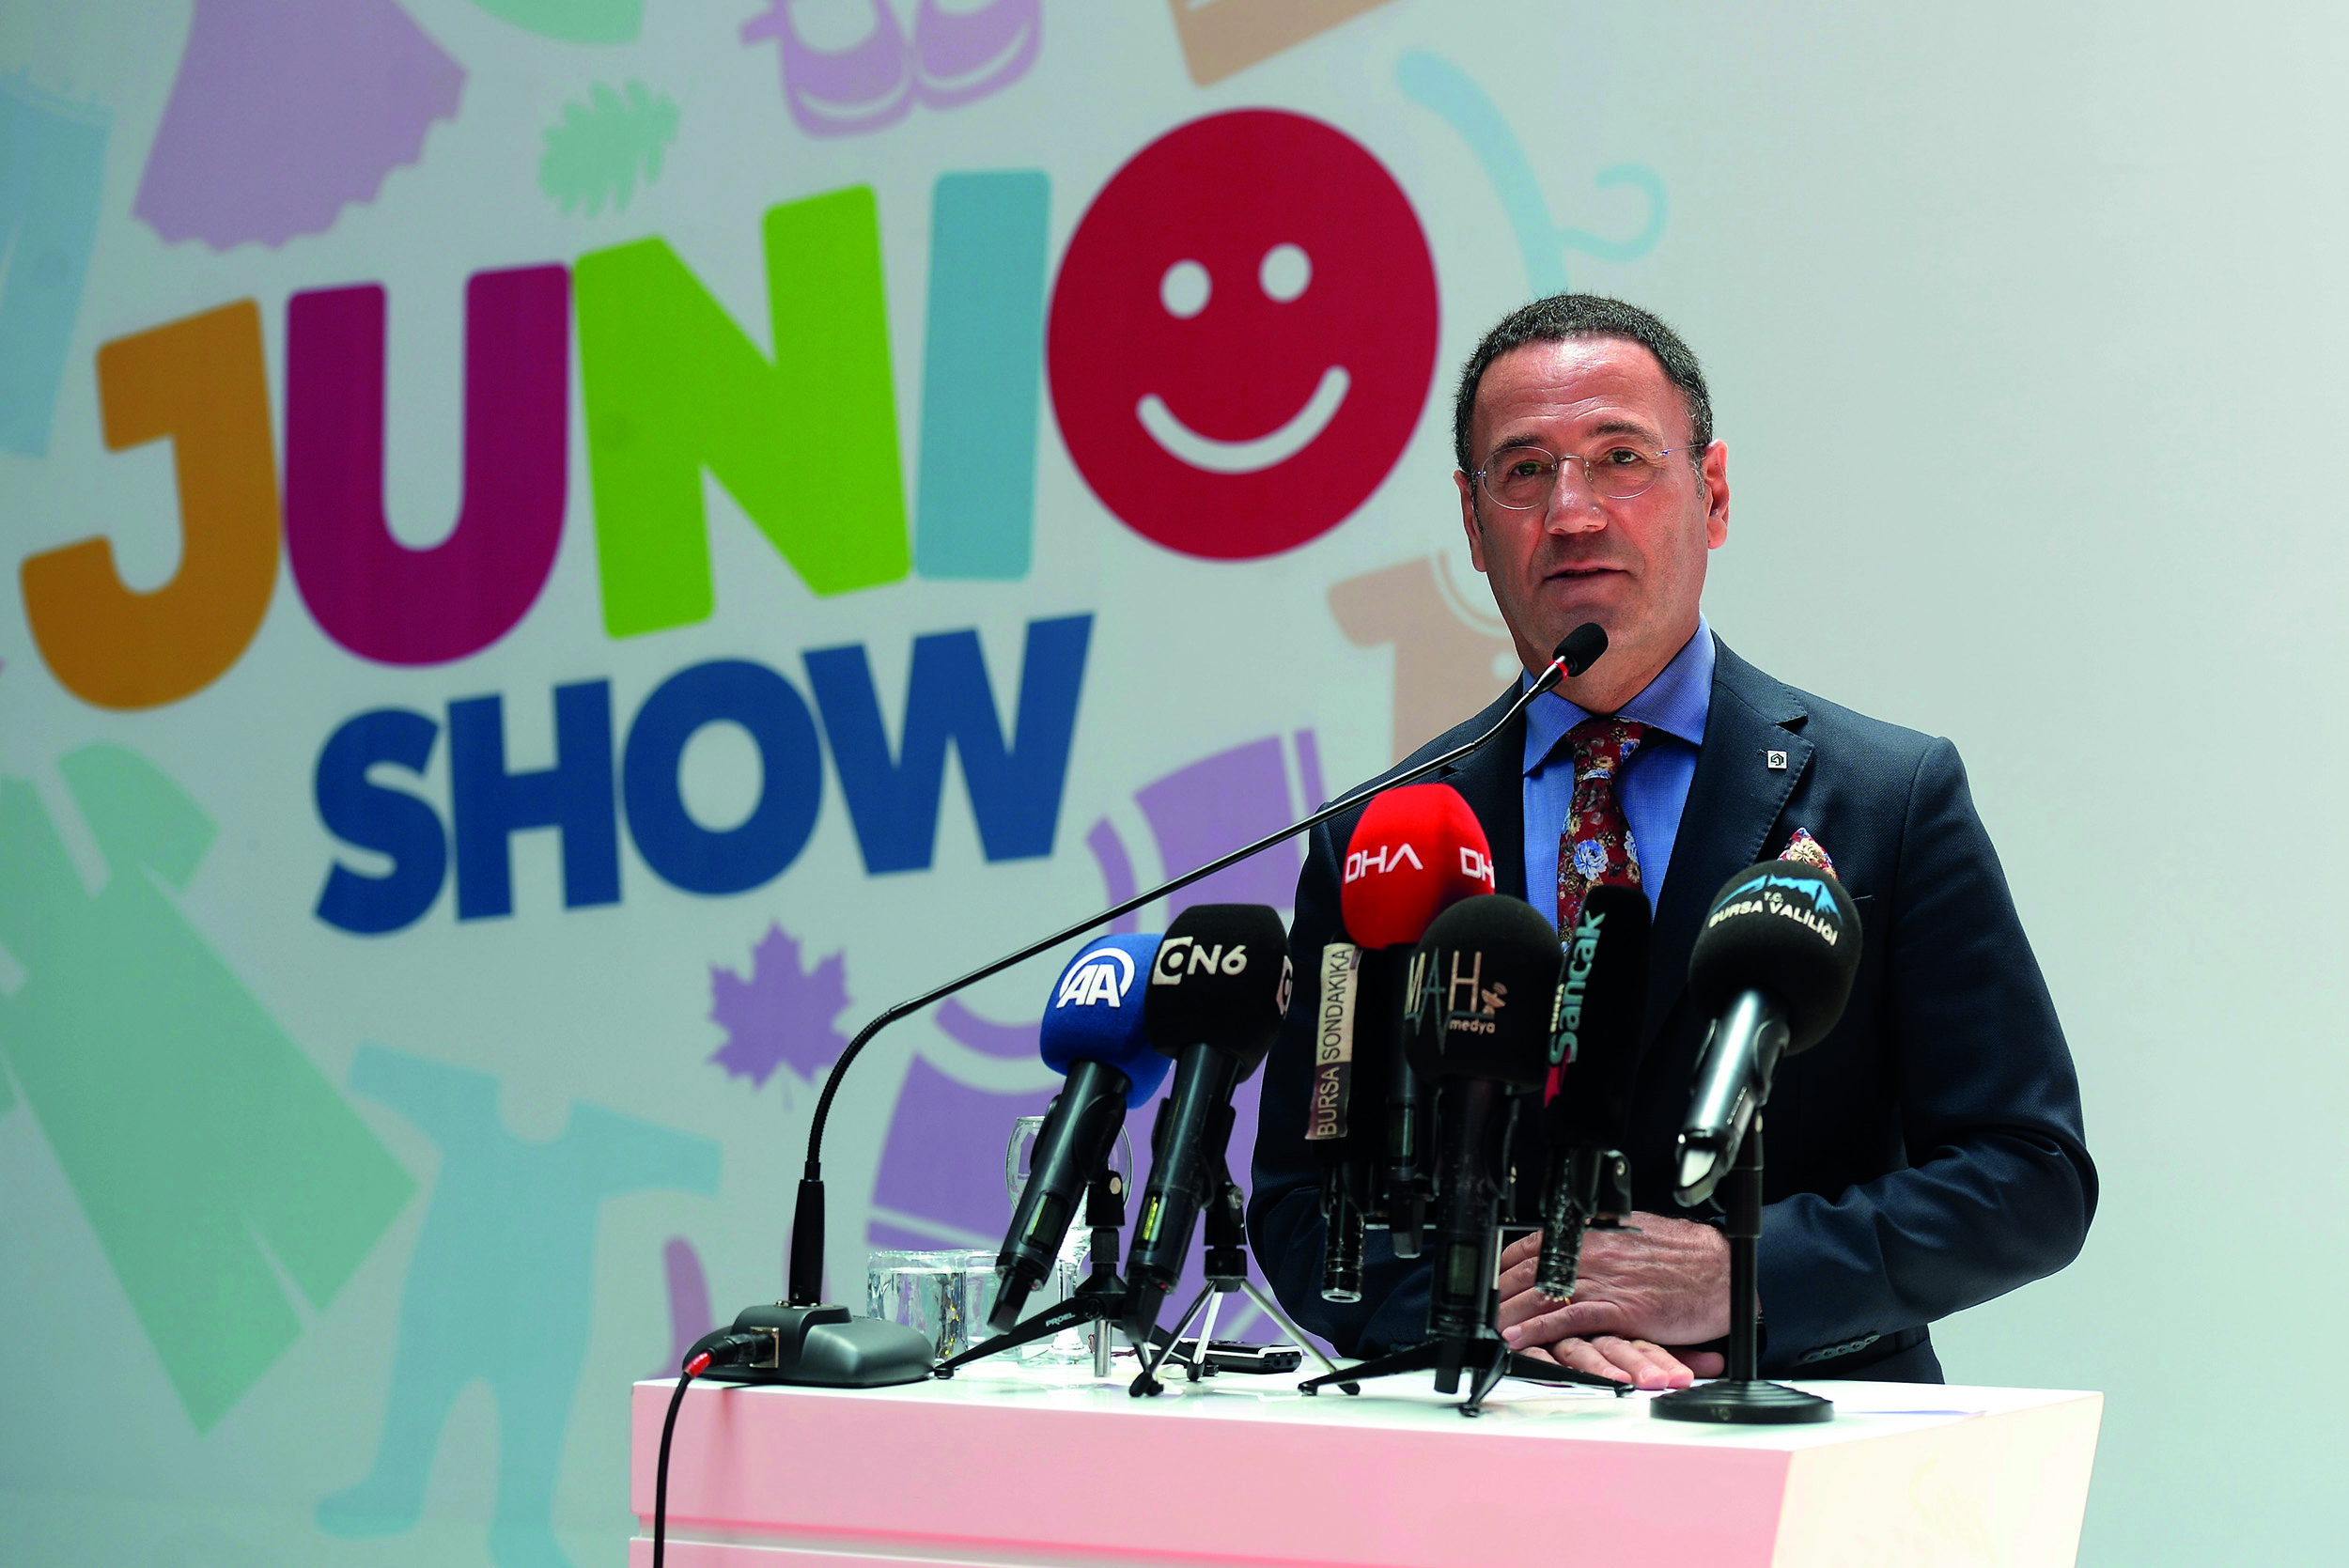 Baby and kids clothing industry to gather with Junioshow on 07-09 July 2021